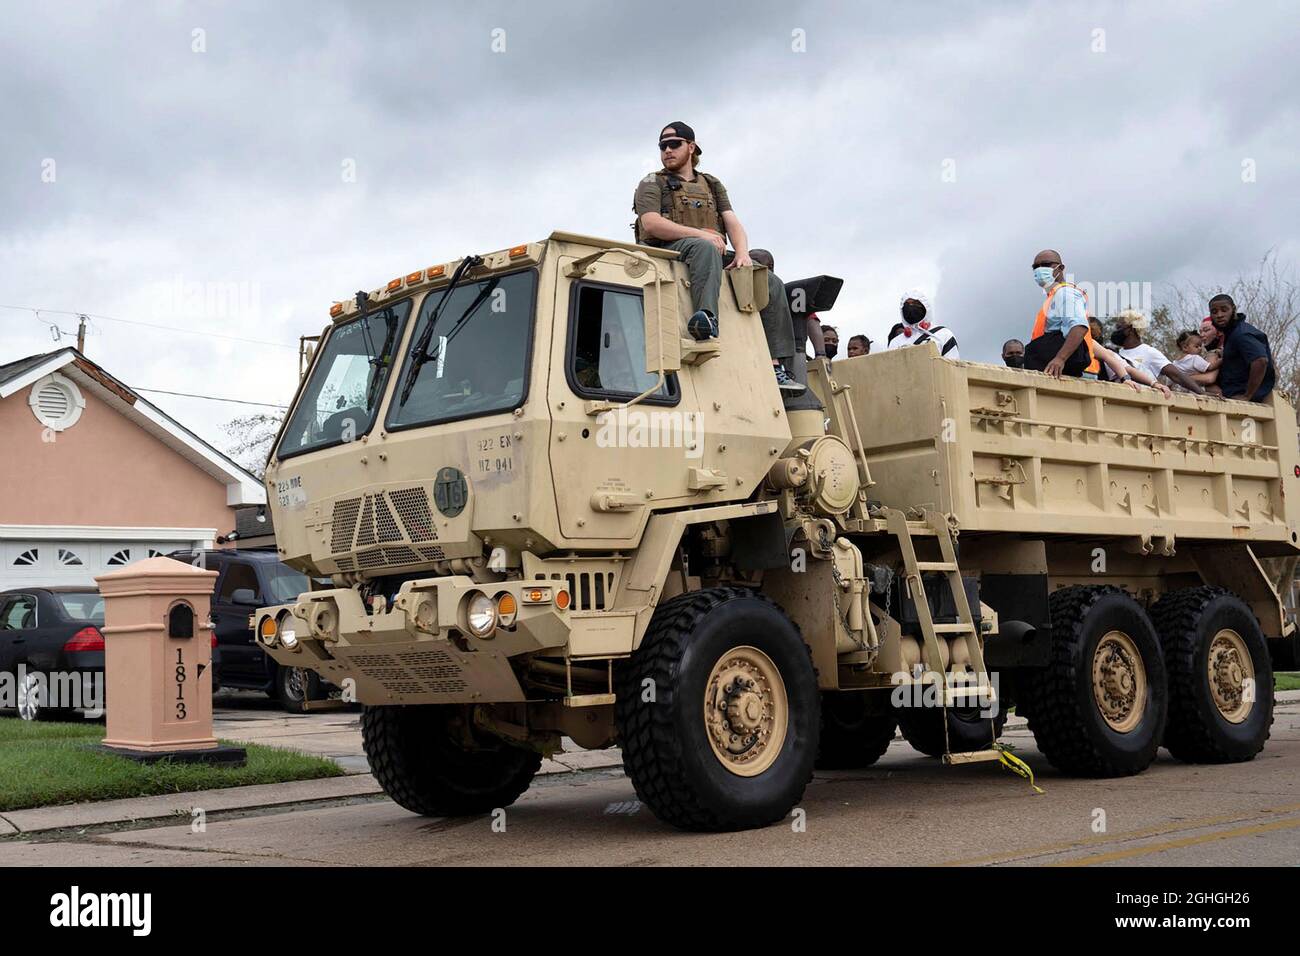 LaPlace, United States of America. 30 August, 2021. Louisiana National Guard soldiers assist in evacuating survivors of Hurricane Ida at St John Parish August 30, 2021 in Laplace, Louisiana. Credit: SSgt. Josiah Pugh/U.S. Army/Alamy Live News Stock Photo